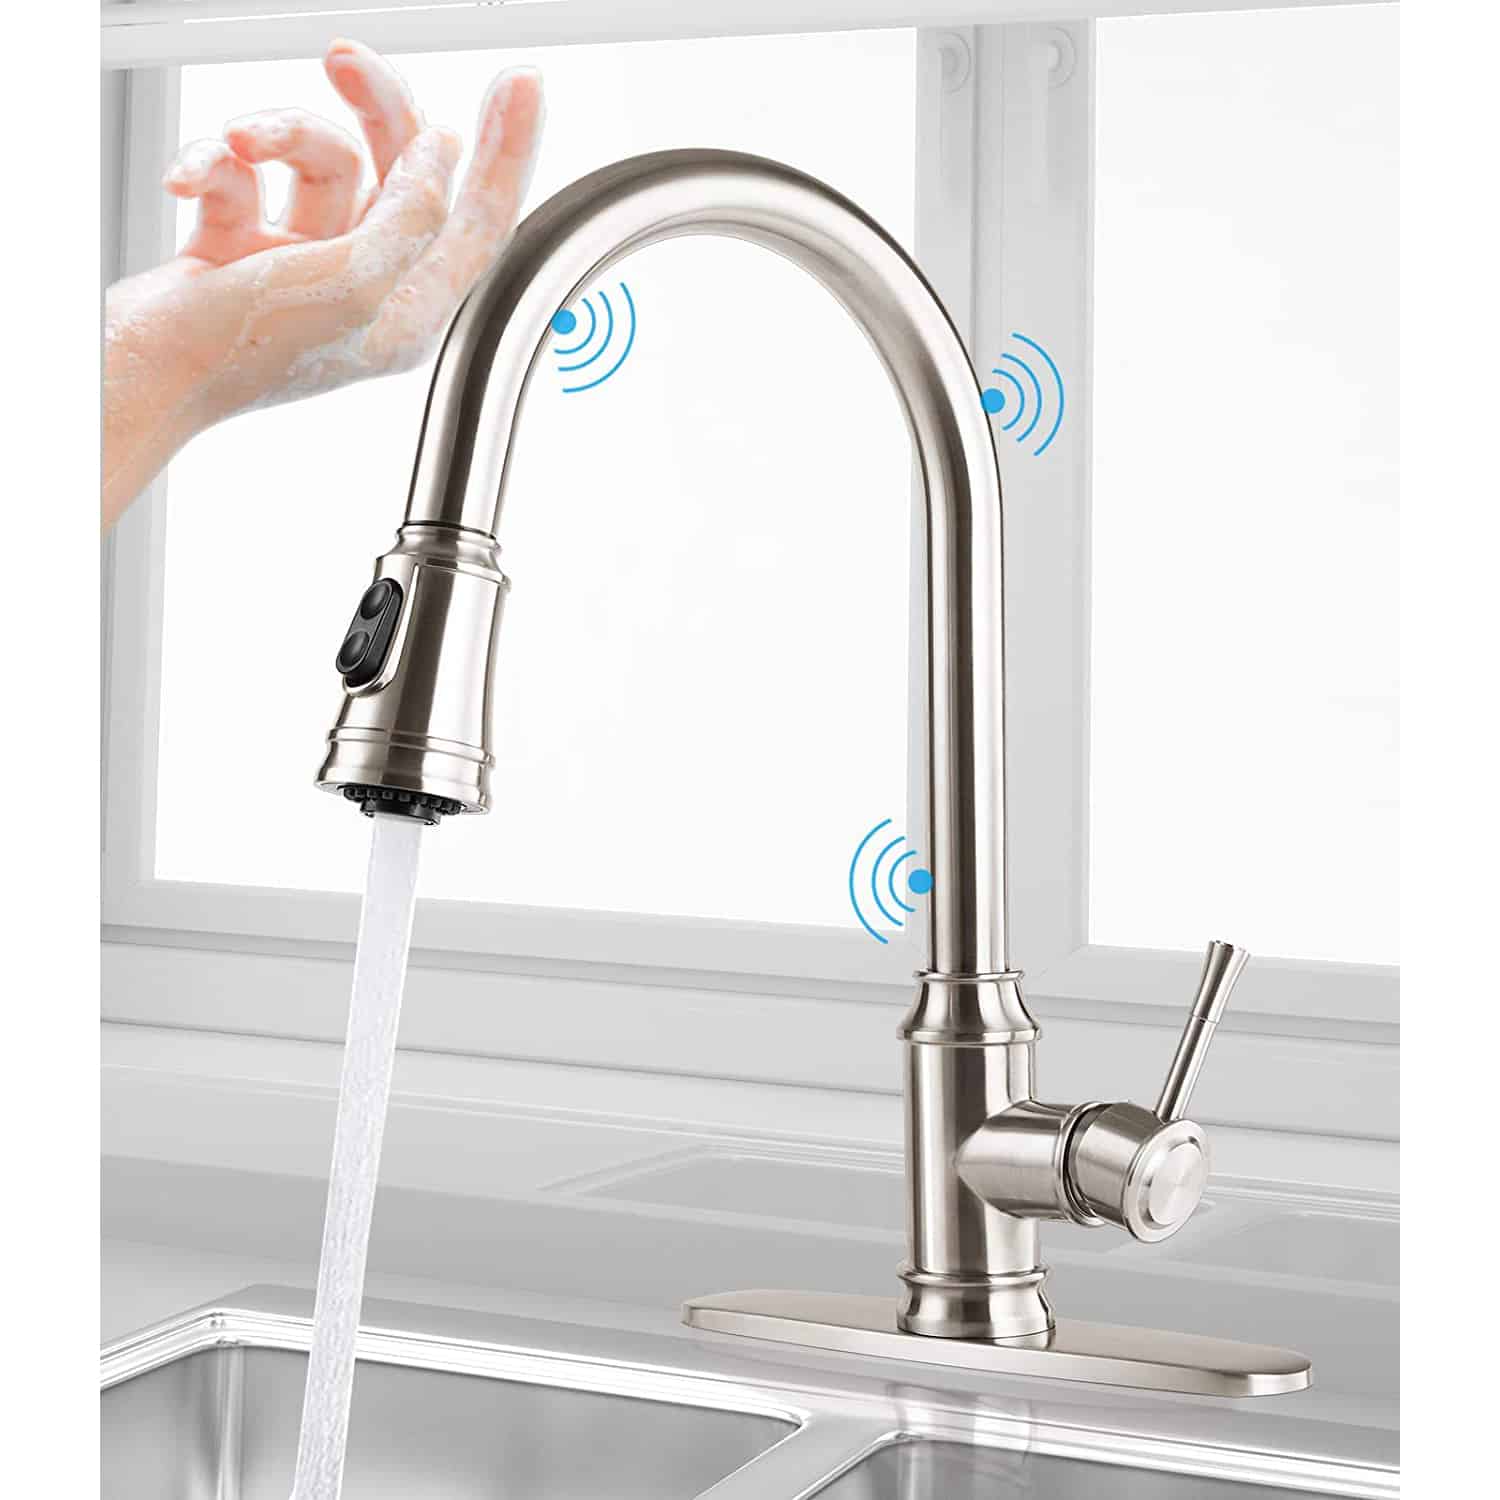 8. CWM Touch Kitchen Faucets With Pull Down Sprayer 2 Water Modes 